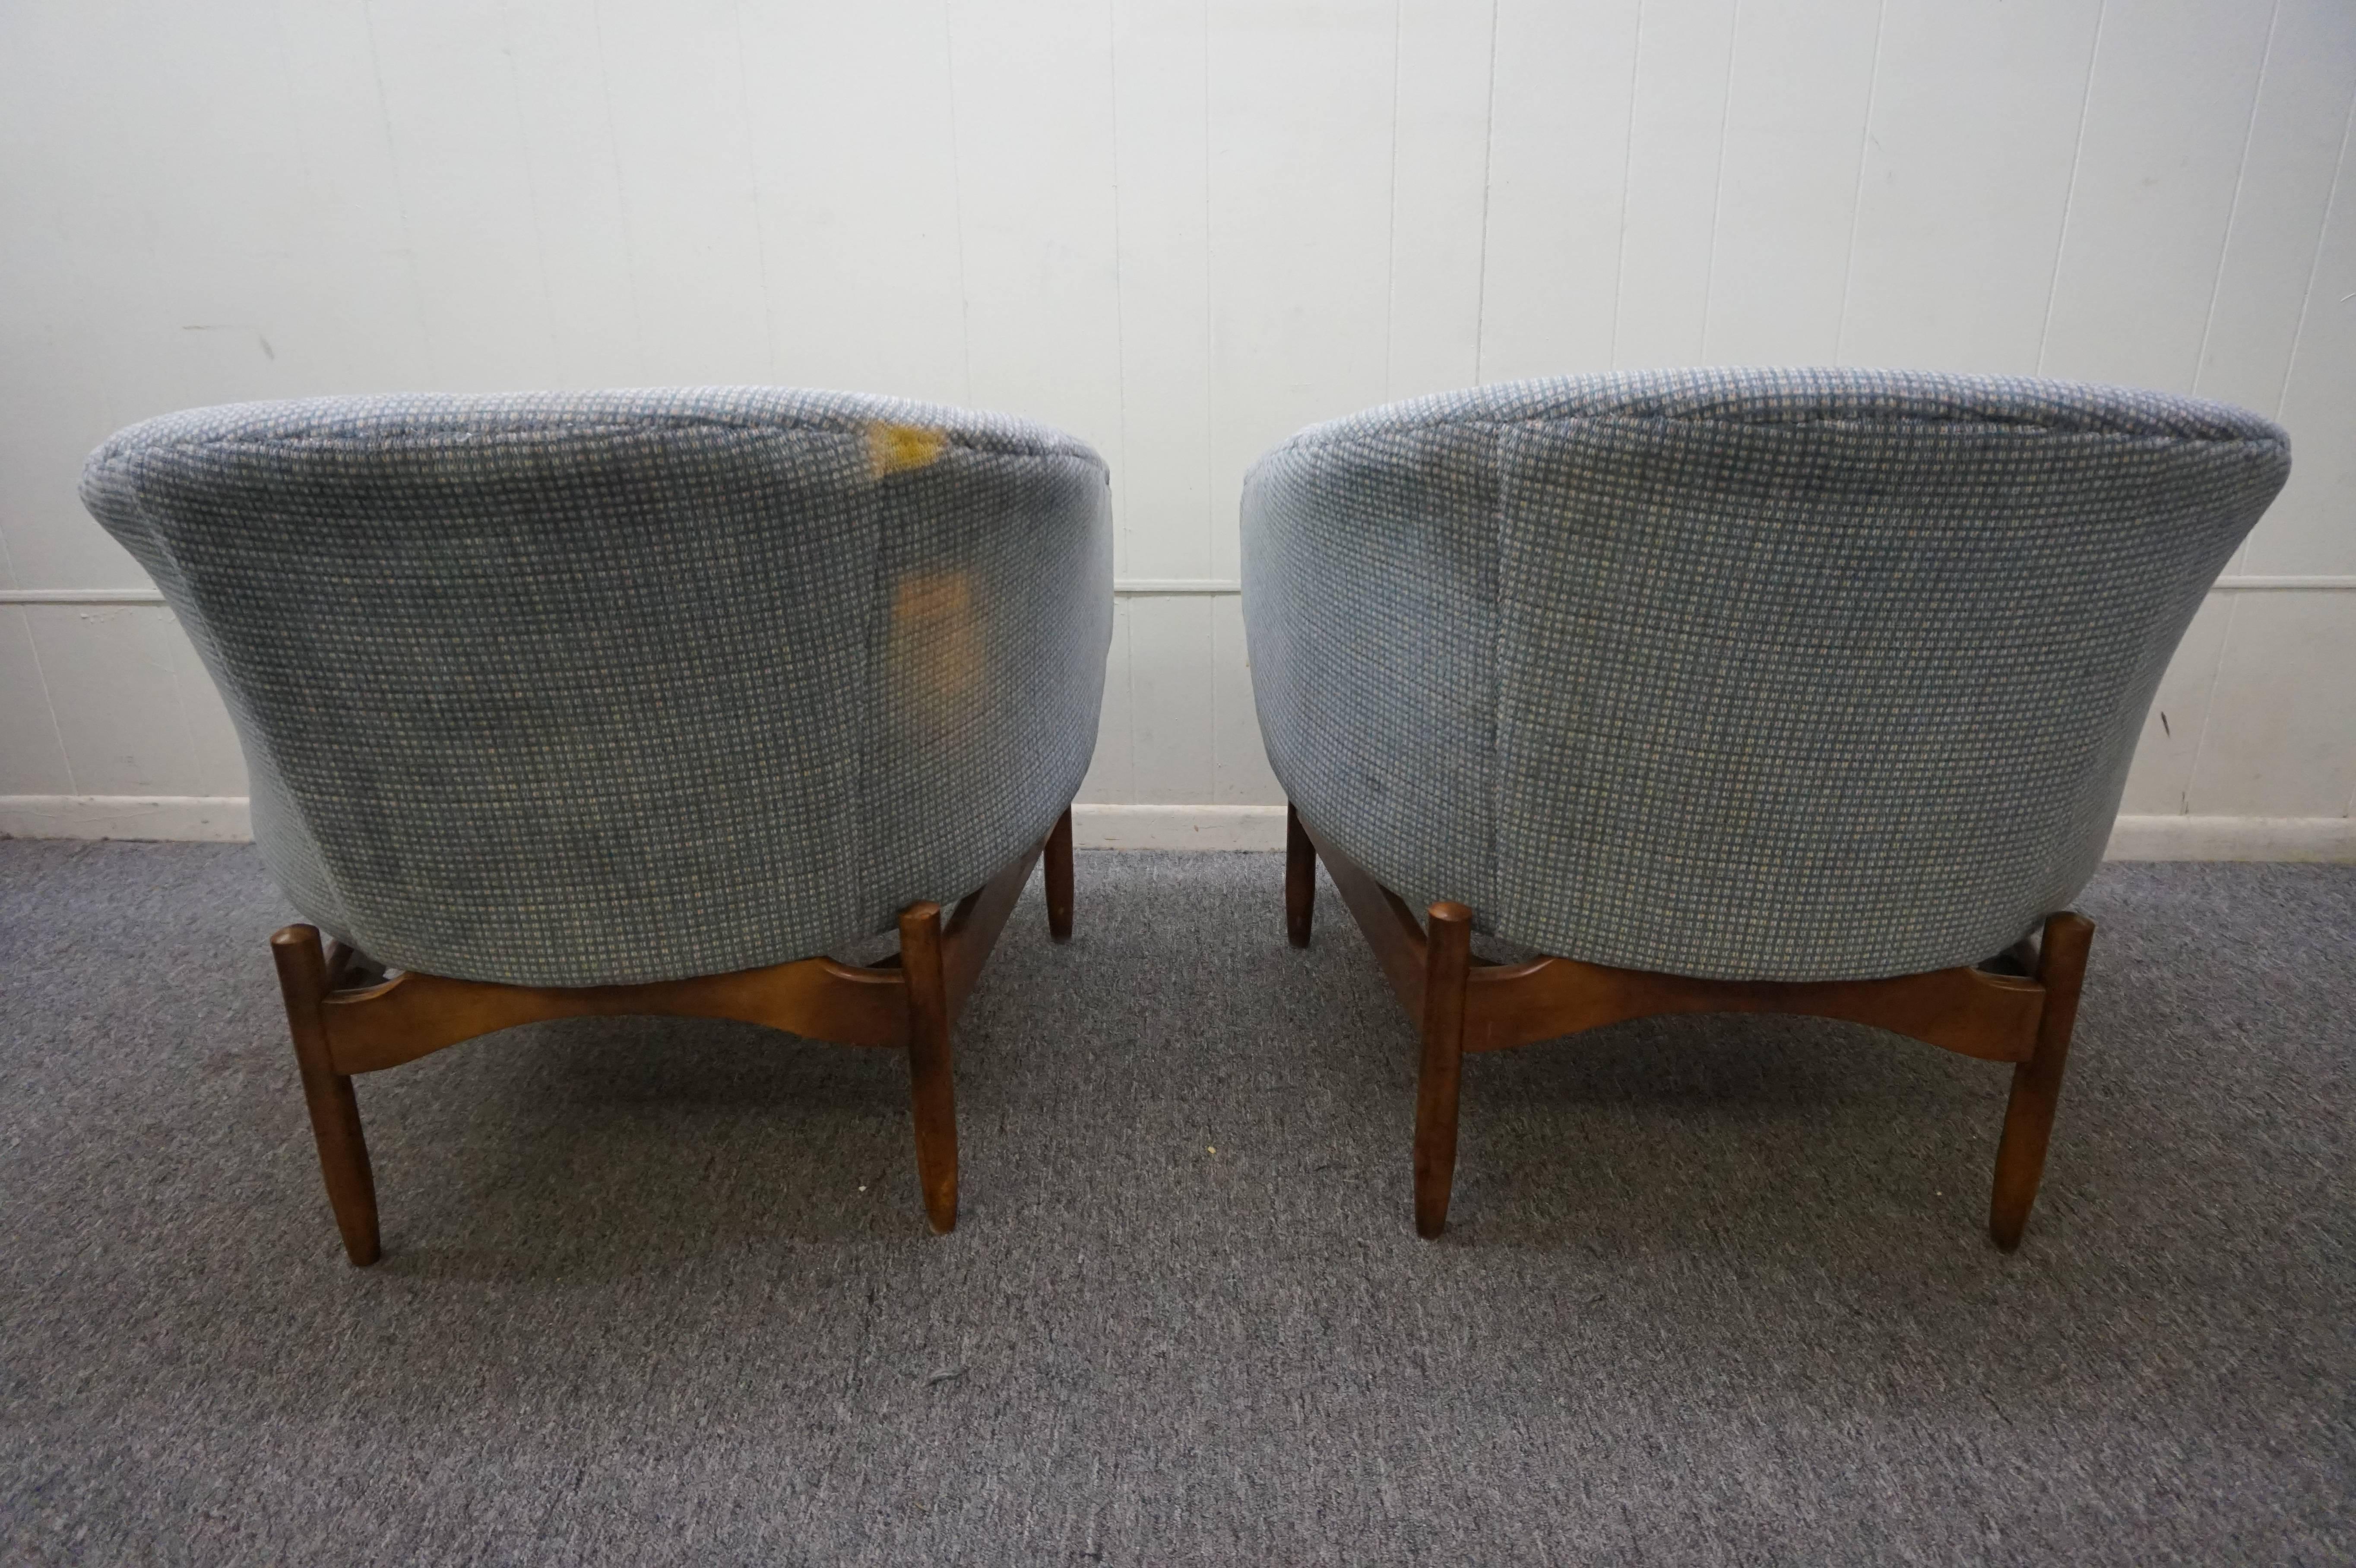 North American Lovely Pair of Lawrence Peabody Barrel Back Lounge Chairs Mid-Century Modern